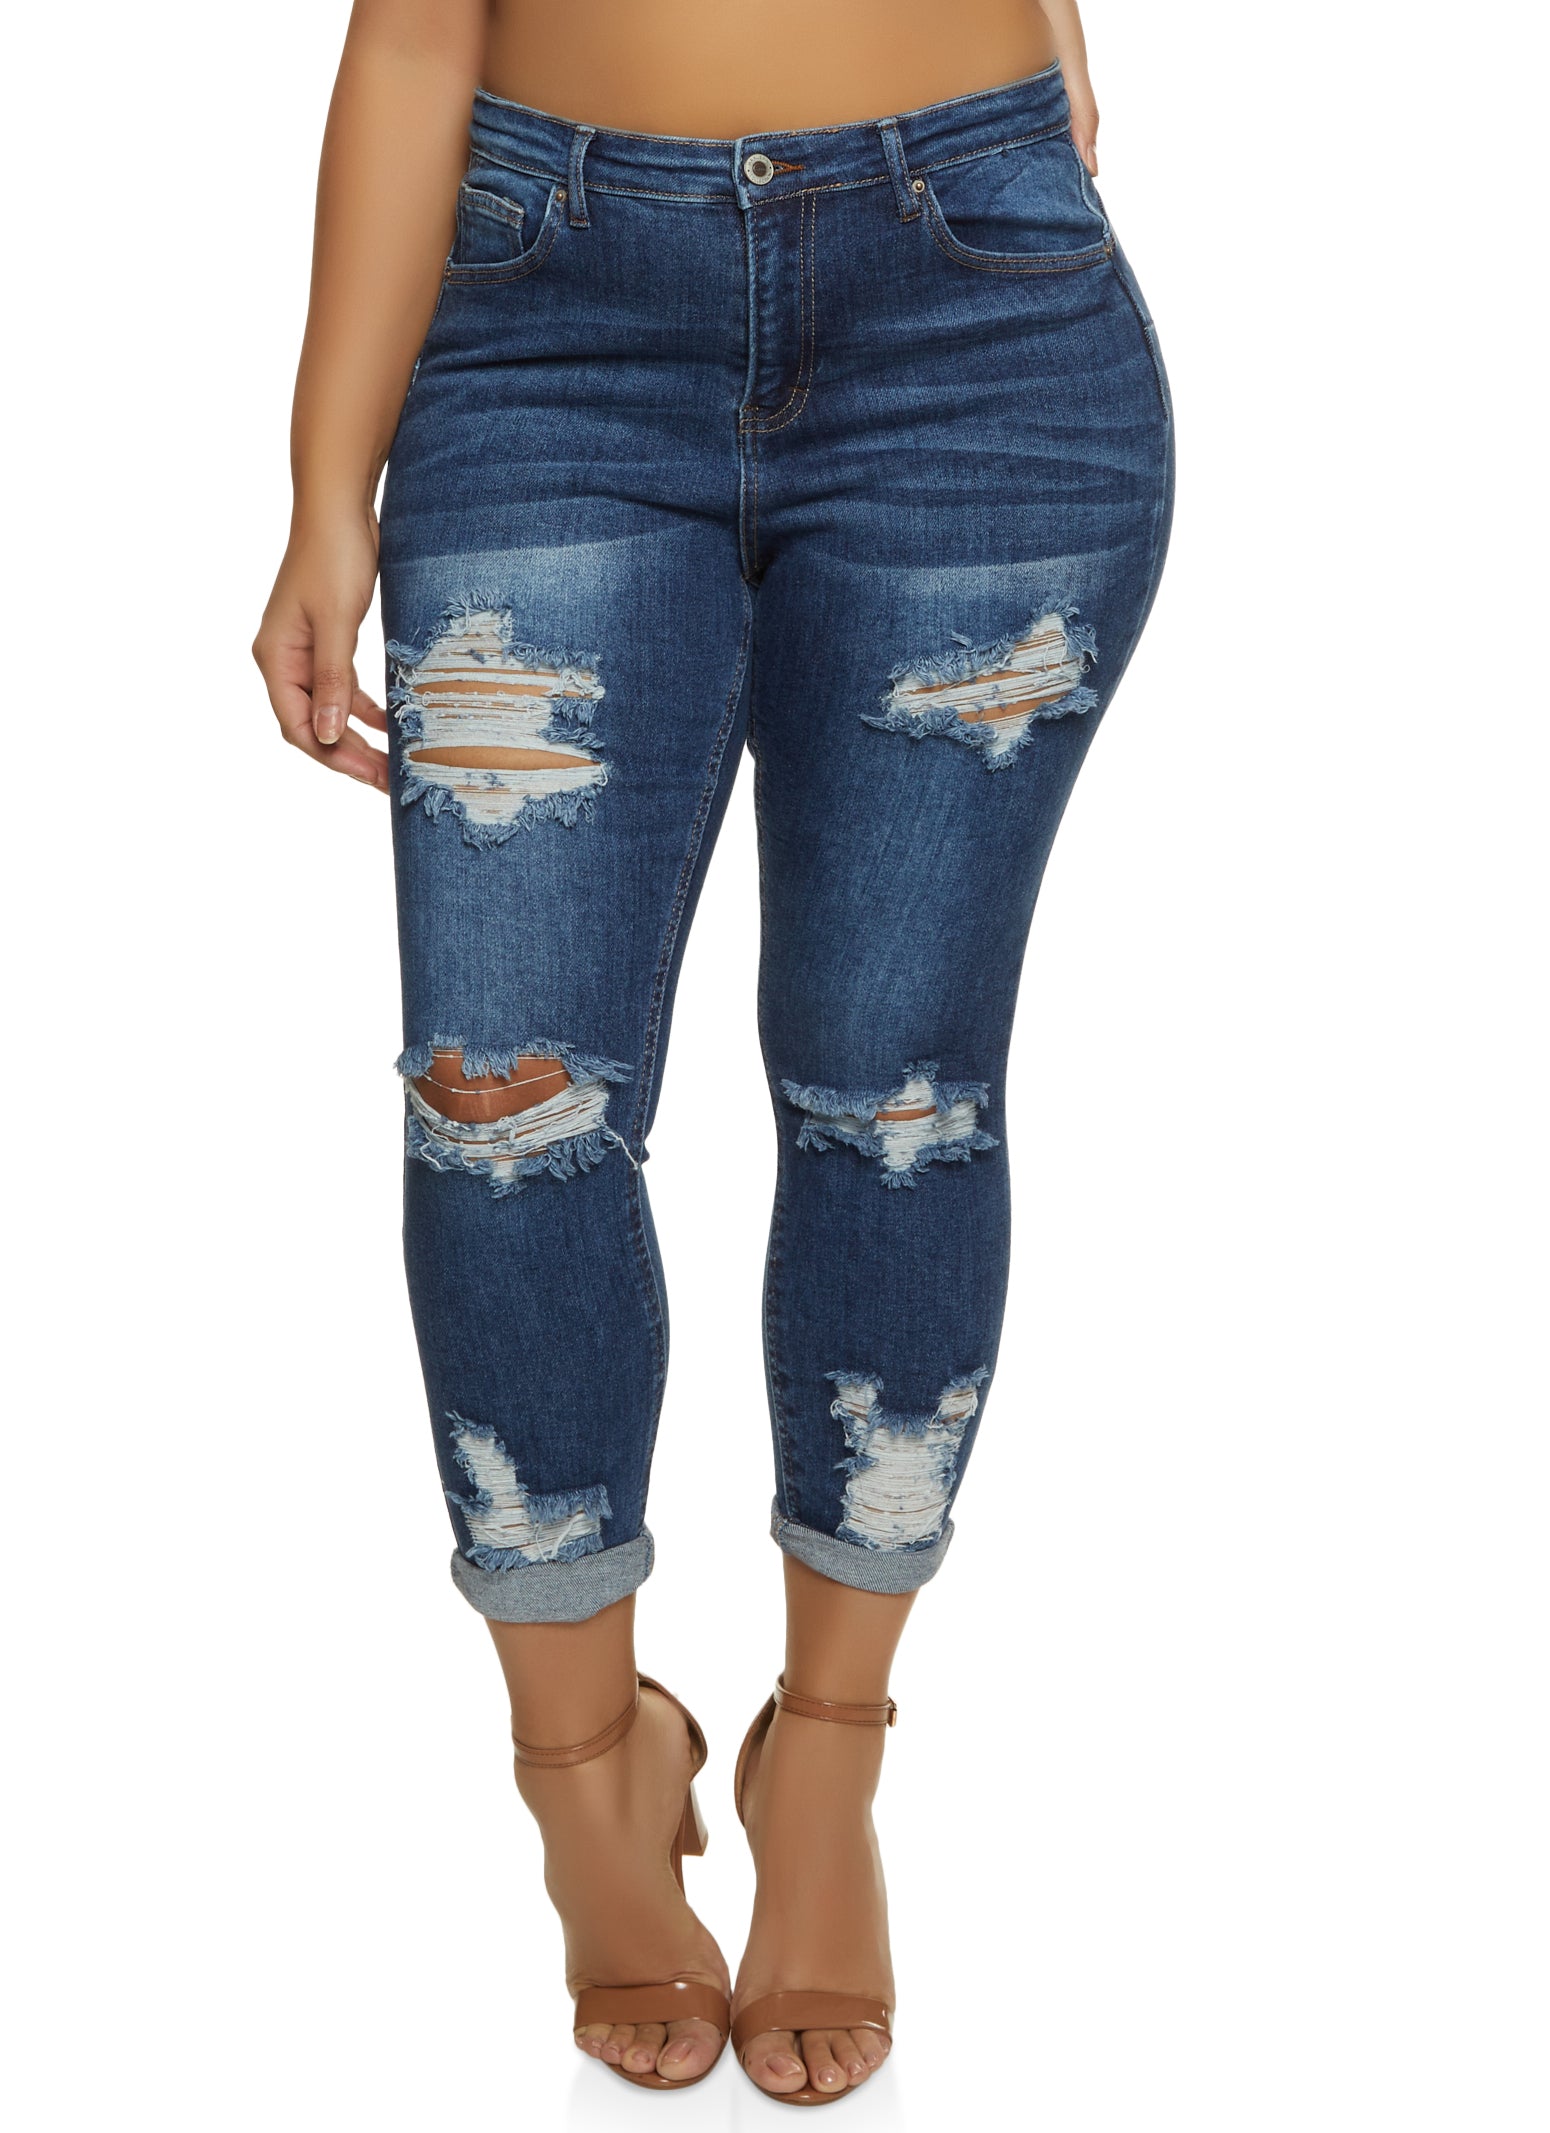 Plus Size Cropped Jeans for Women, Everyday Low Prices